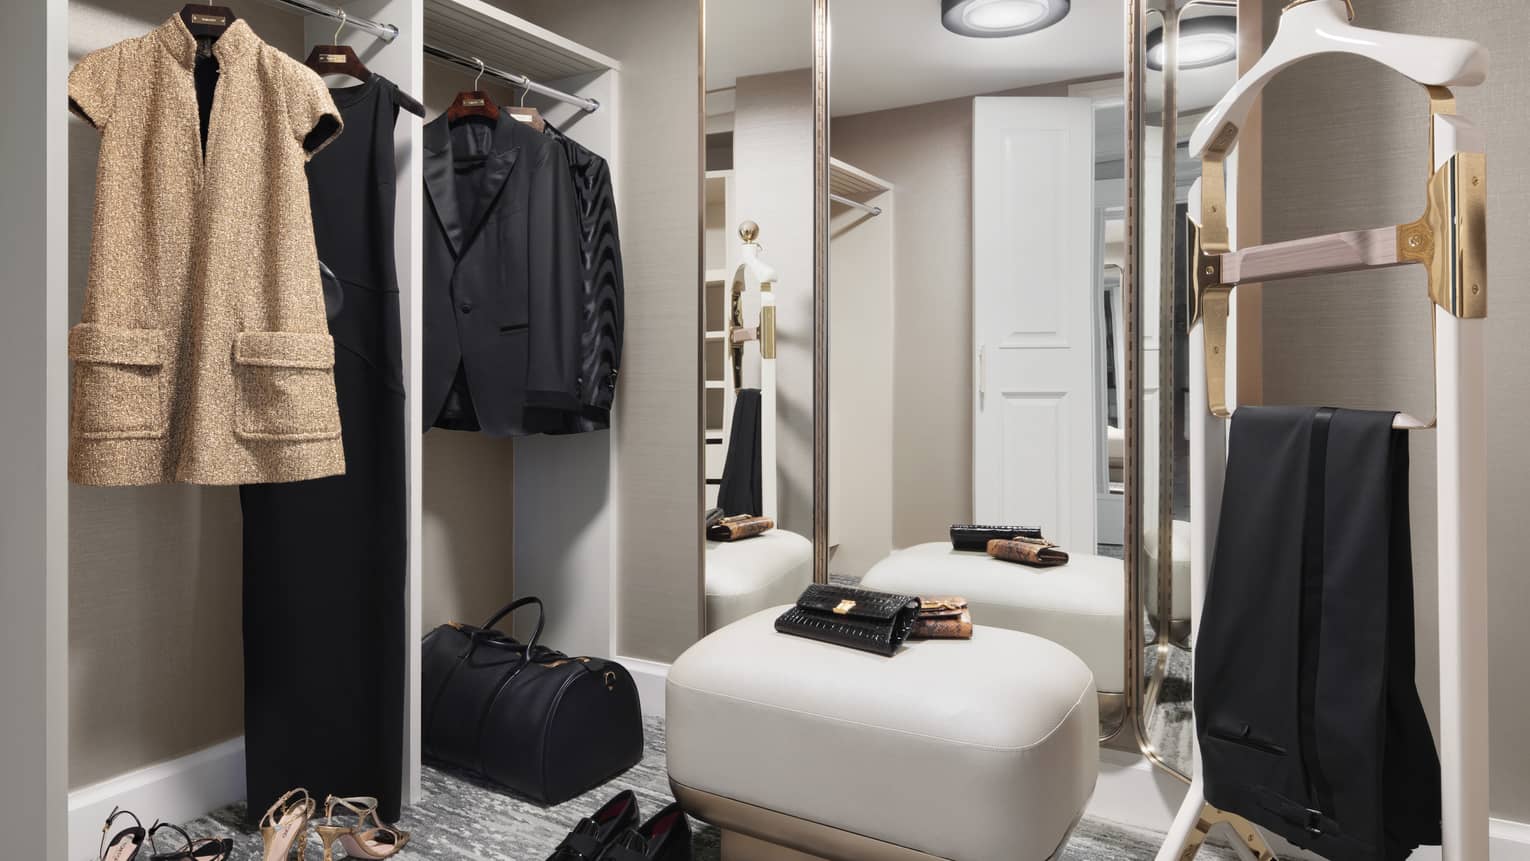 Large closet and dressing room with three-way mirror, Presidential Suite at Four Seasons Hotel Las Vegas